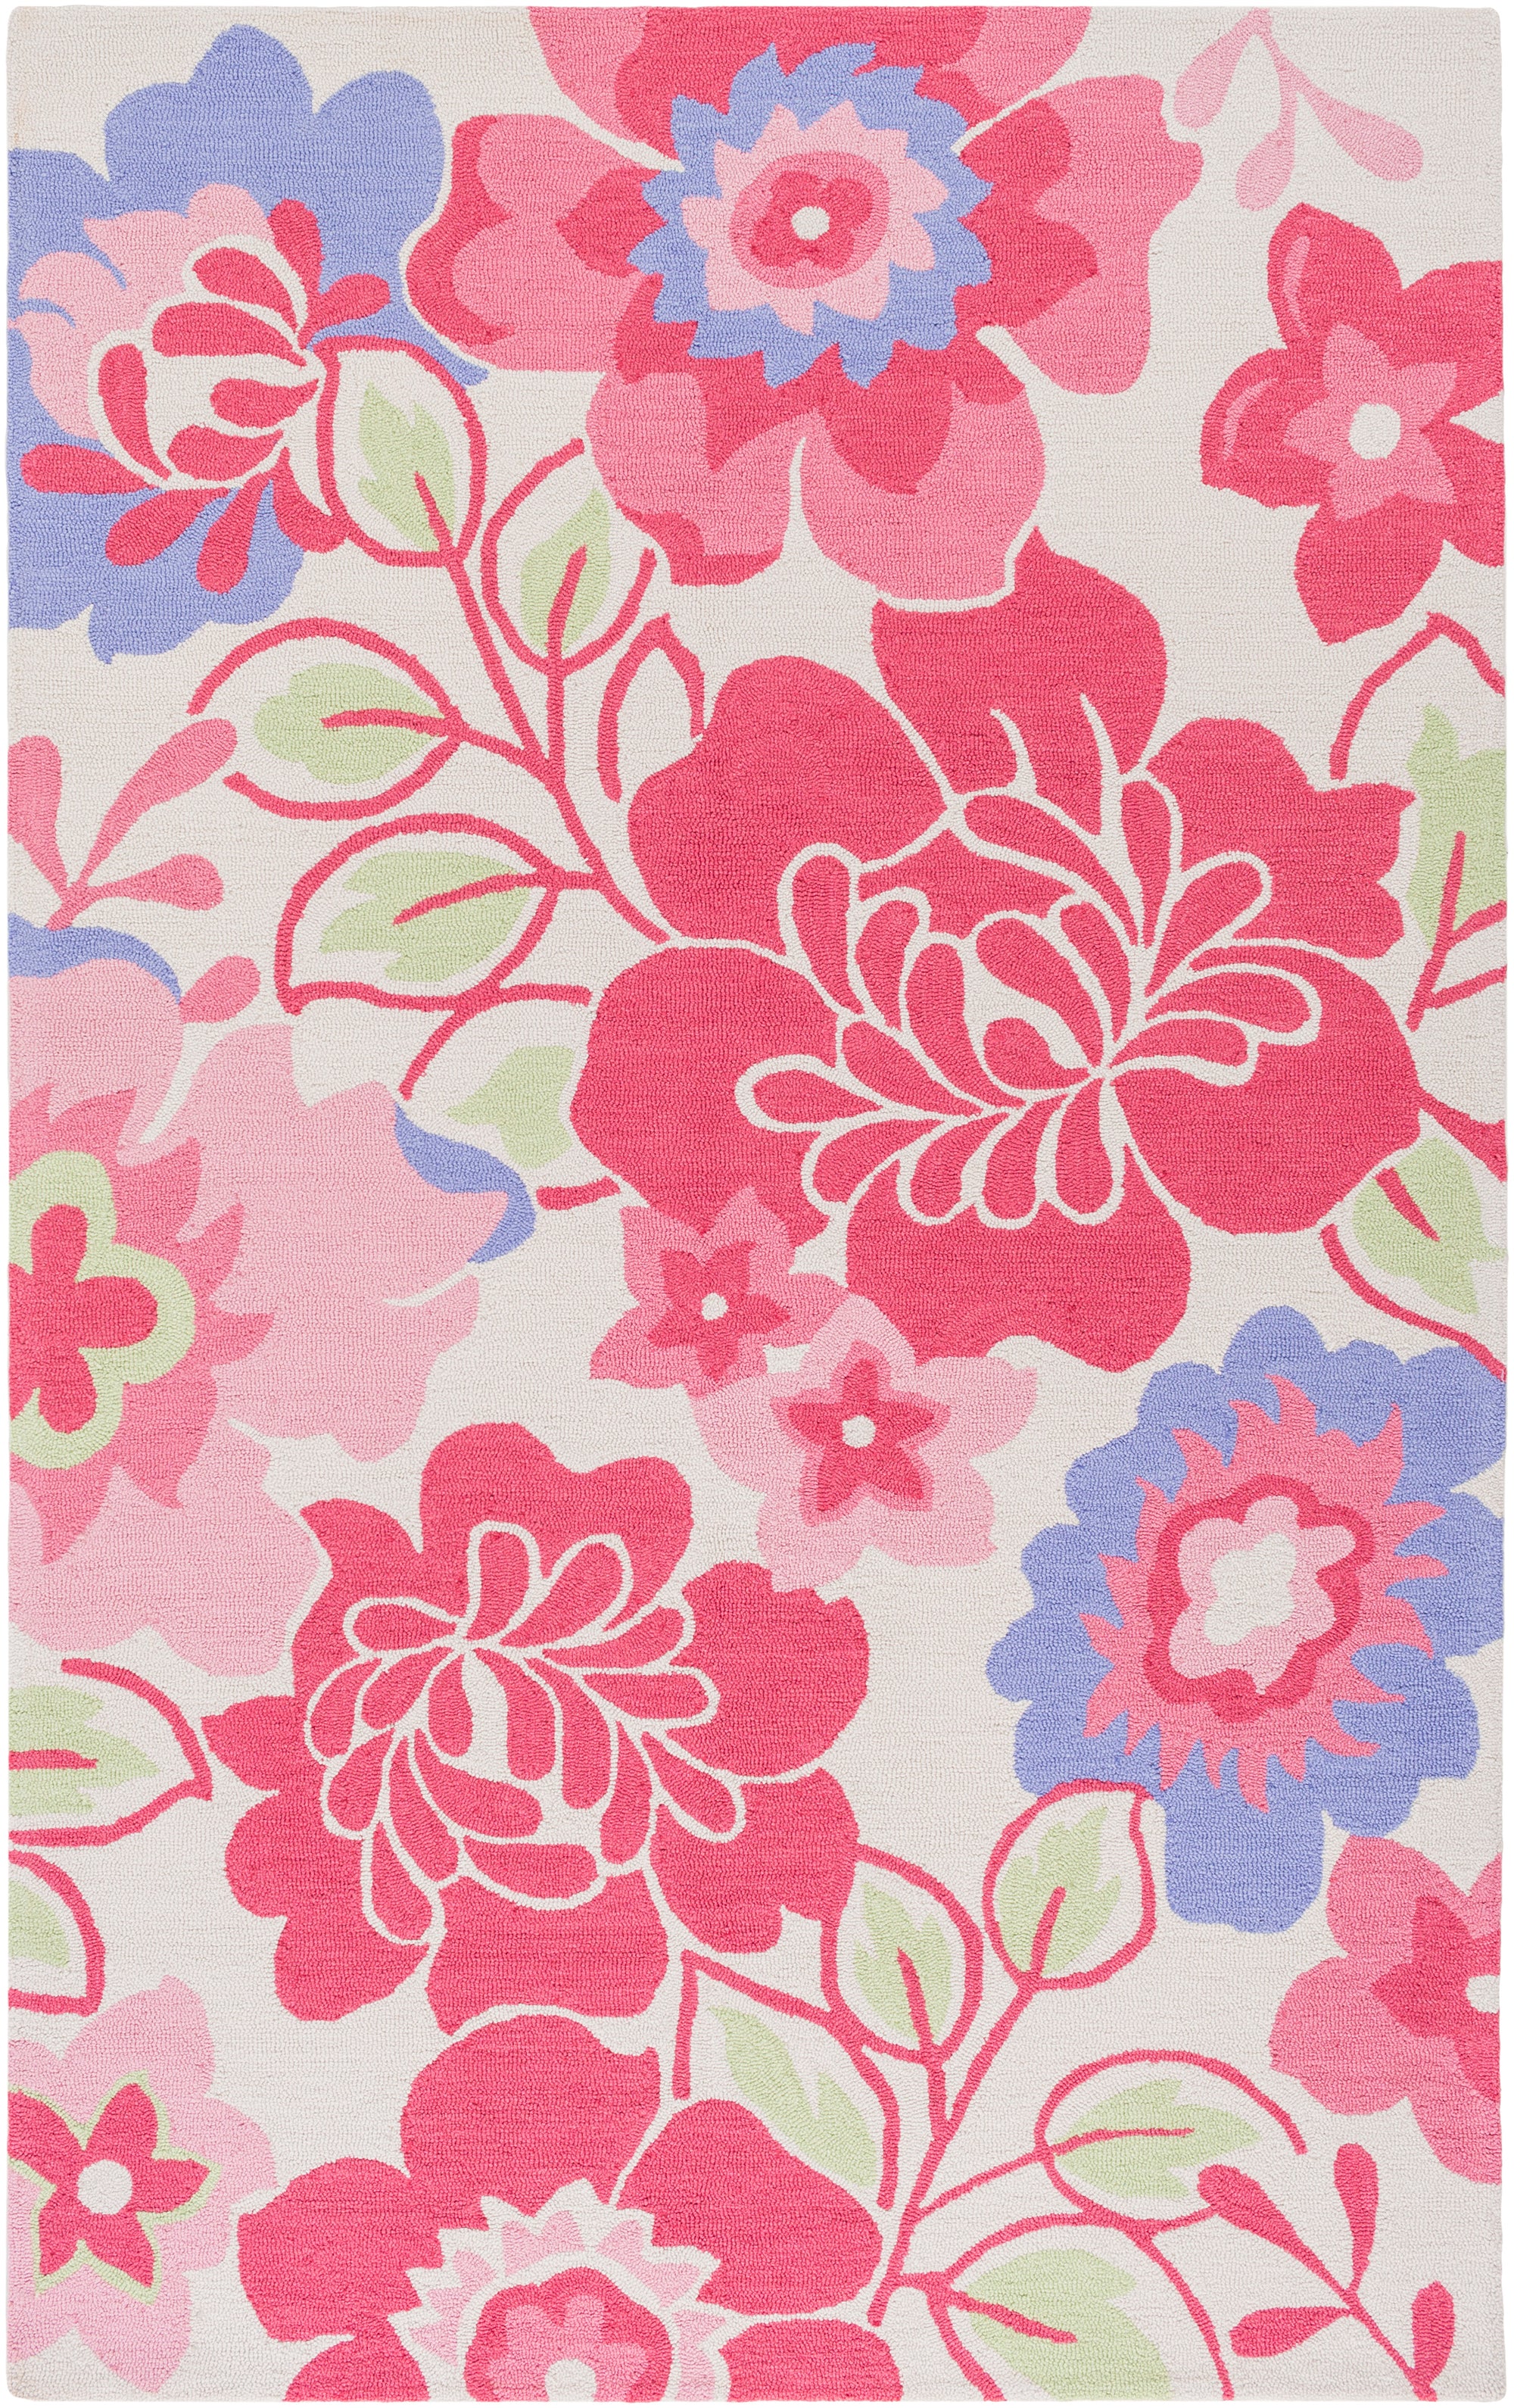 Livabliss Peek-A-Boo PKB7007 Pink/Purple Floral and Paisley Area Rug